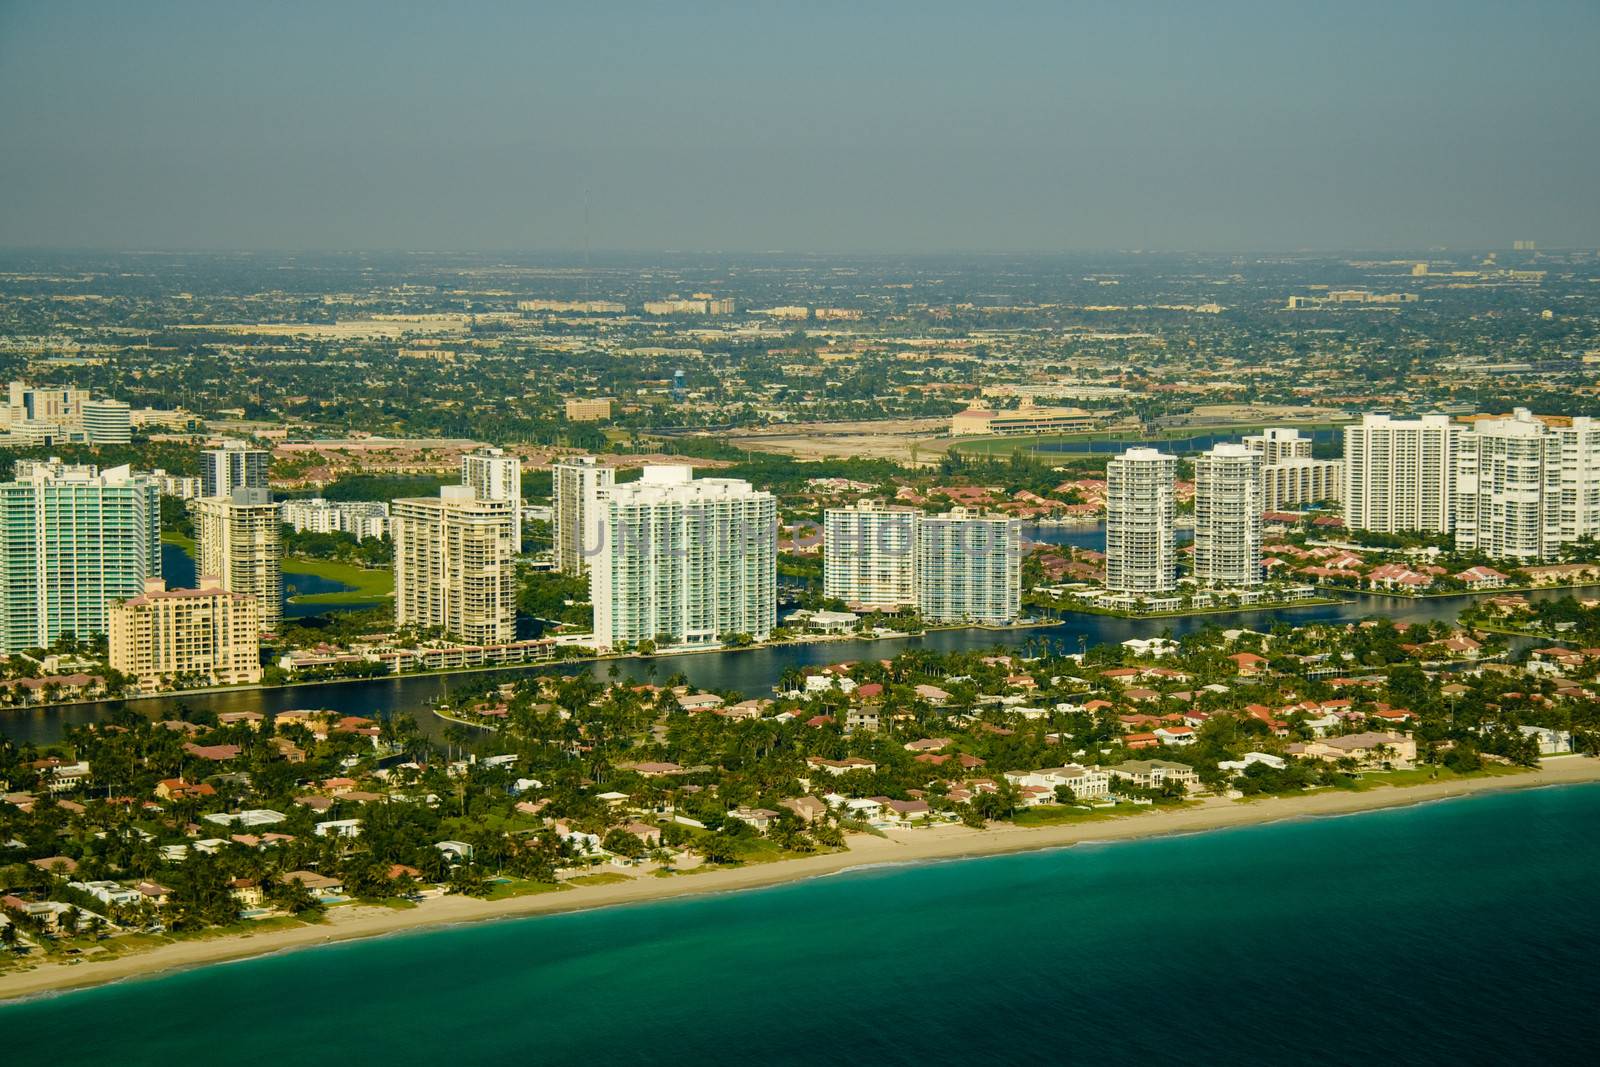 Aerial view of a city at the waterfront, Miami, Miami-Dade County, Florida, USA